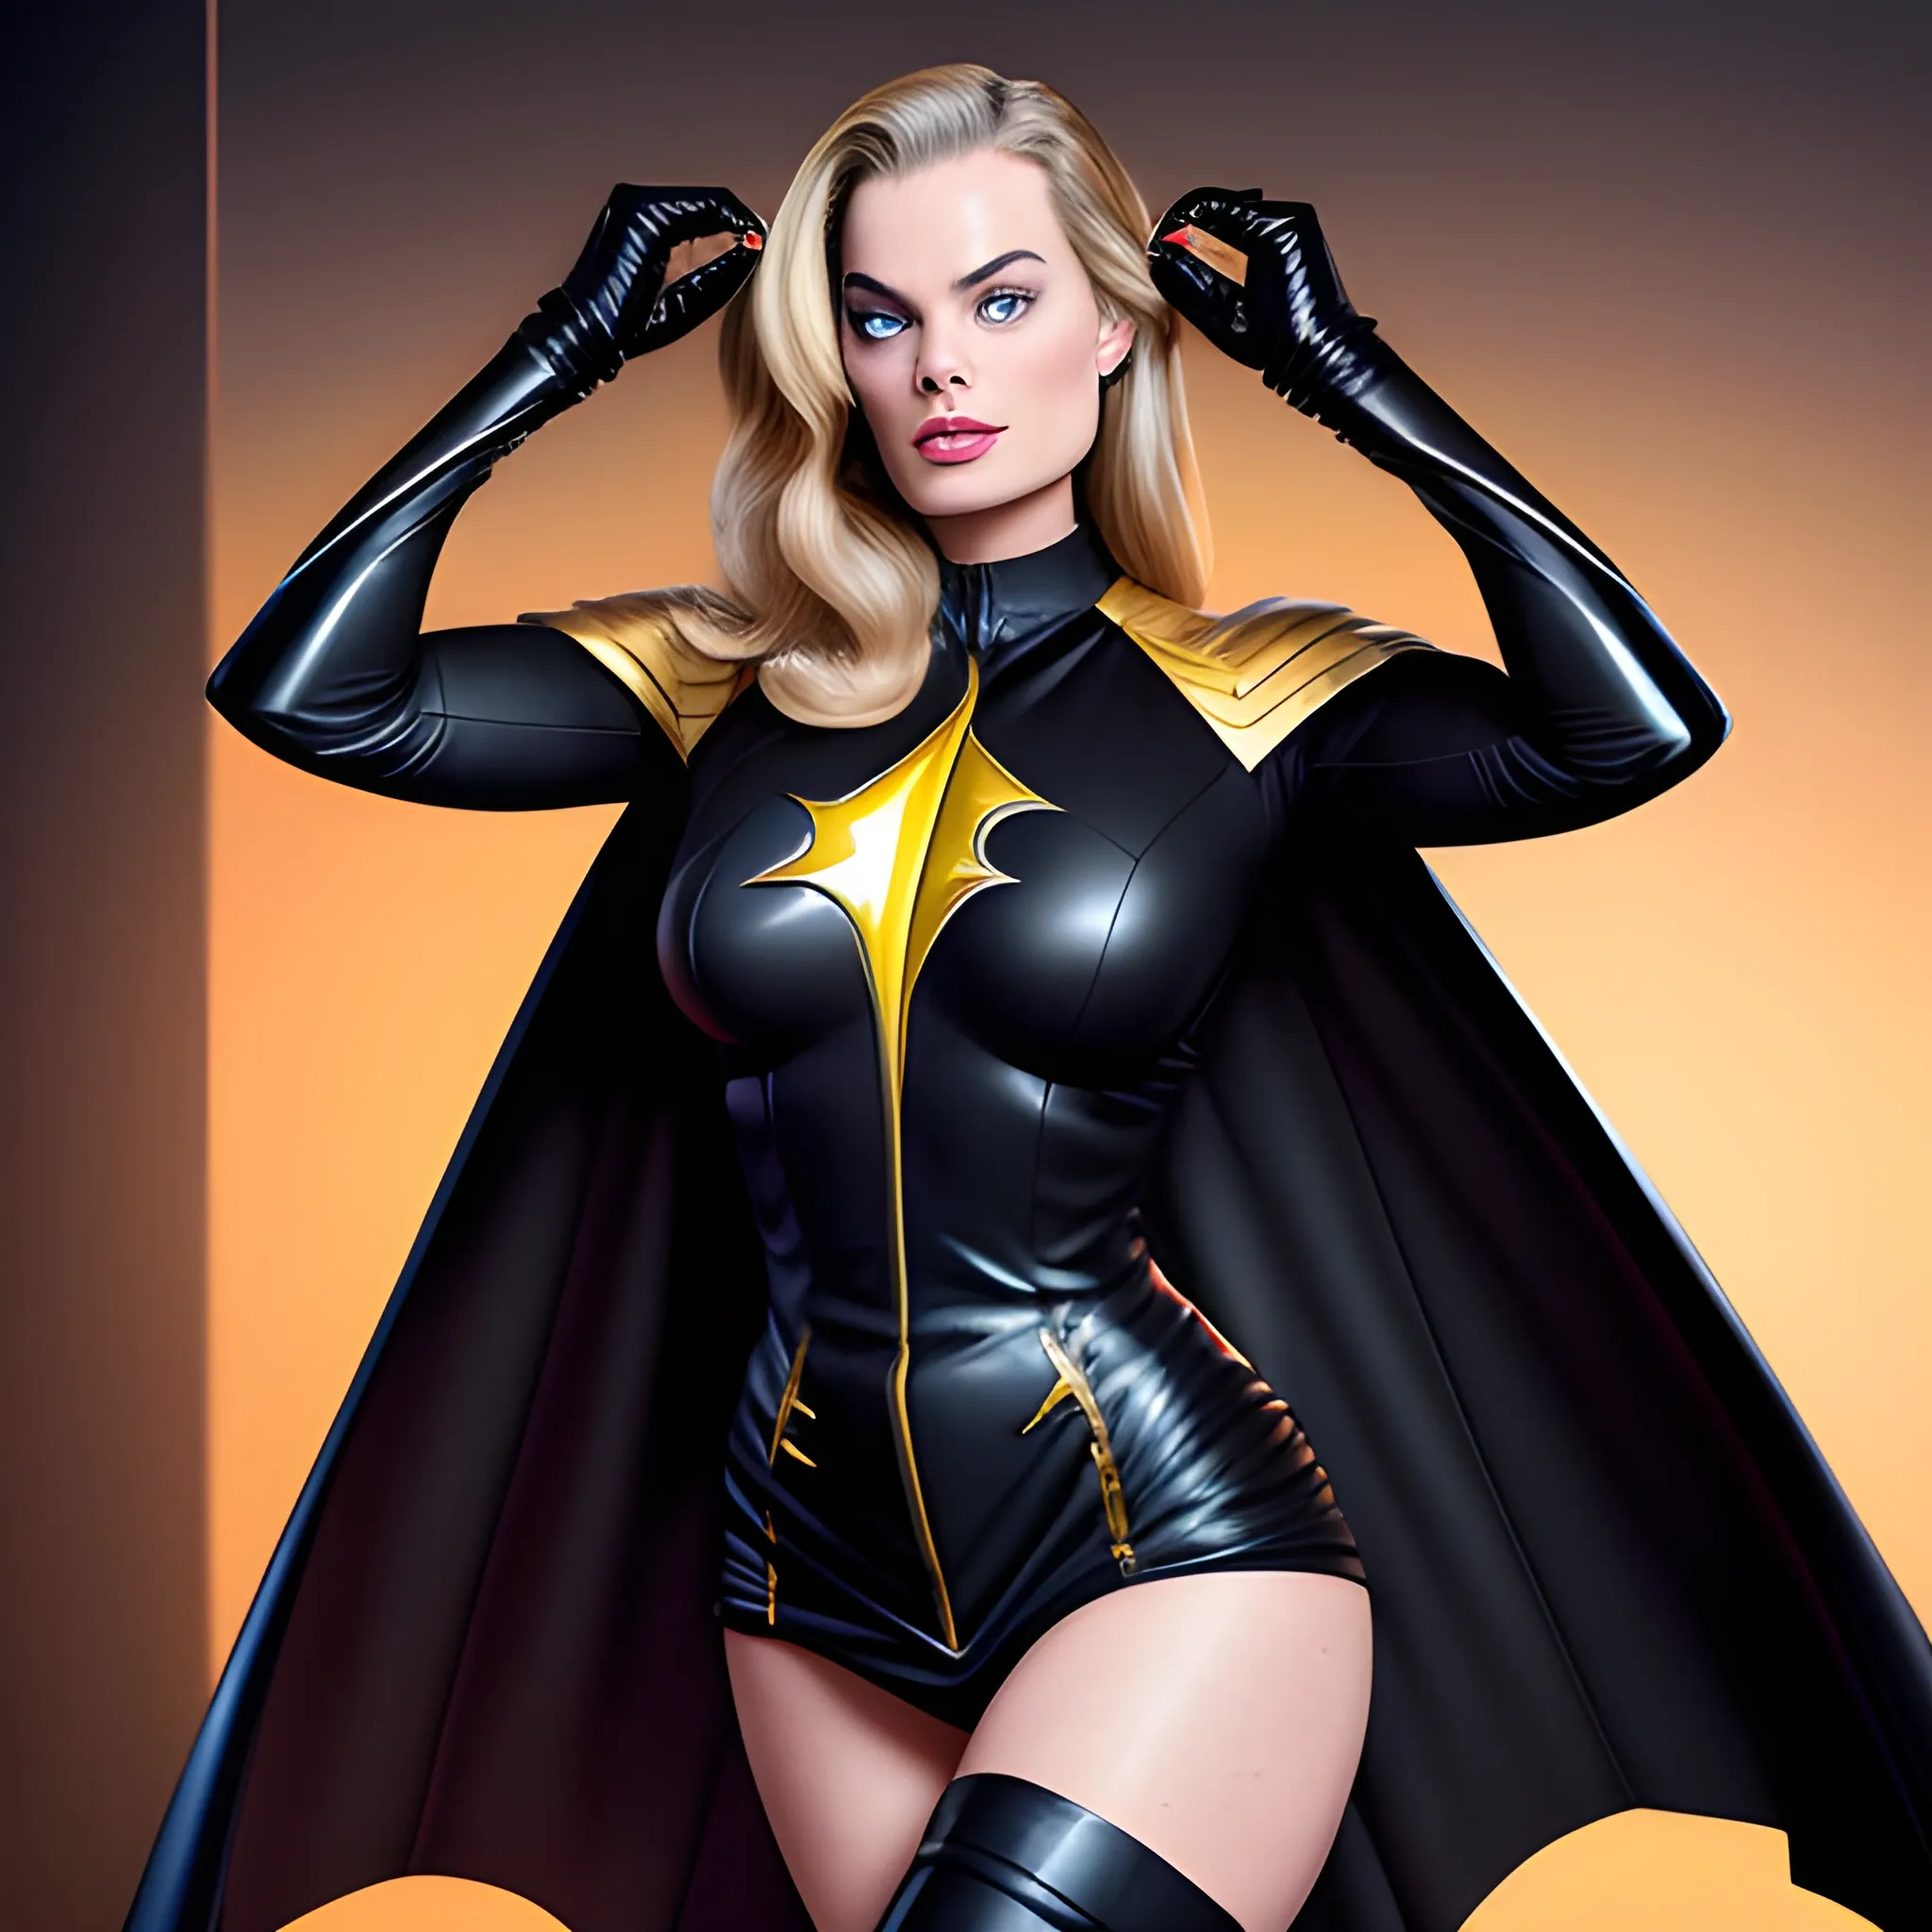 Sexy woman wearing a black Adam suit, Margot Robbie face, full body, wearing a miniskirt, black cape, real human appearance, 